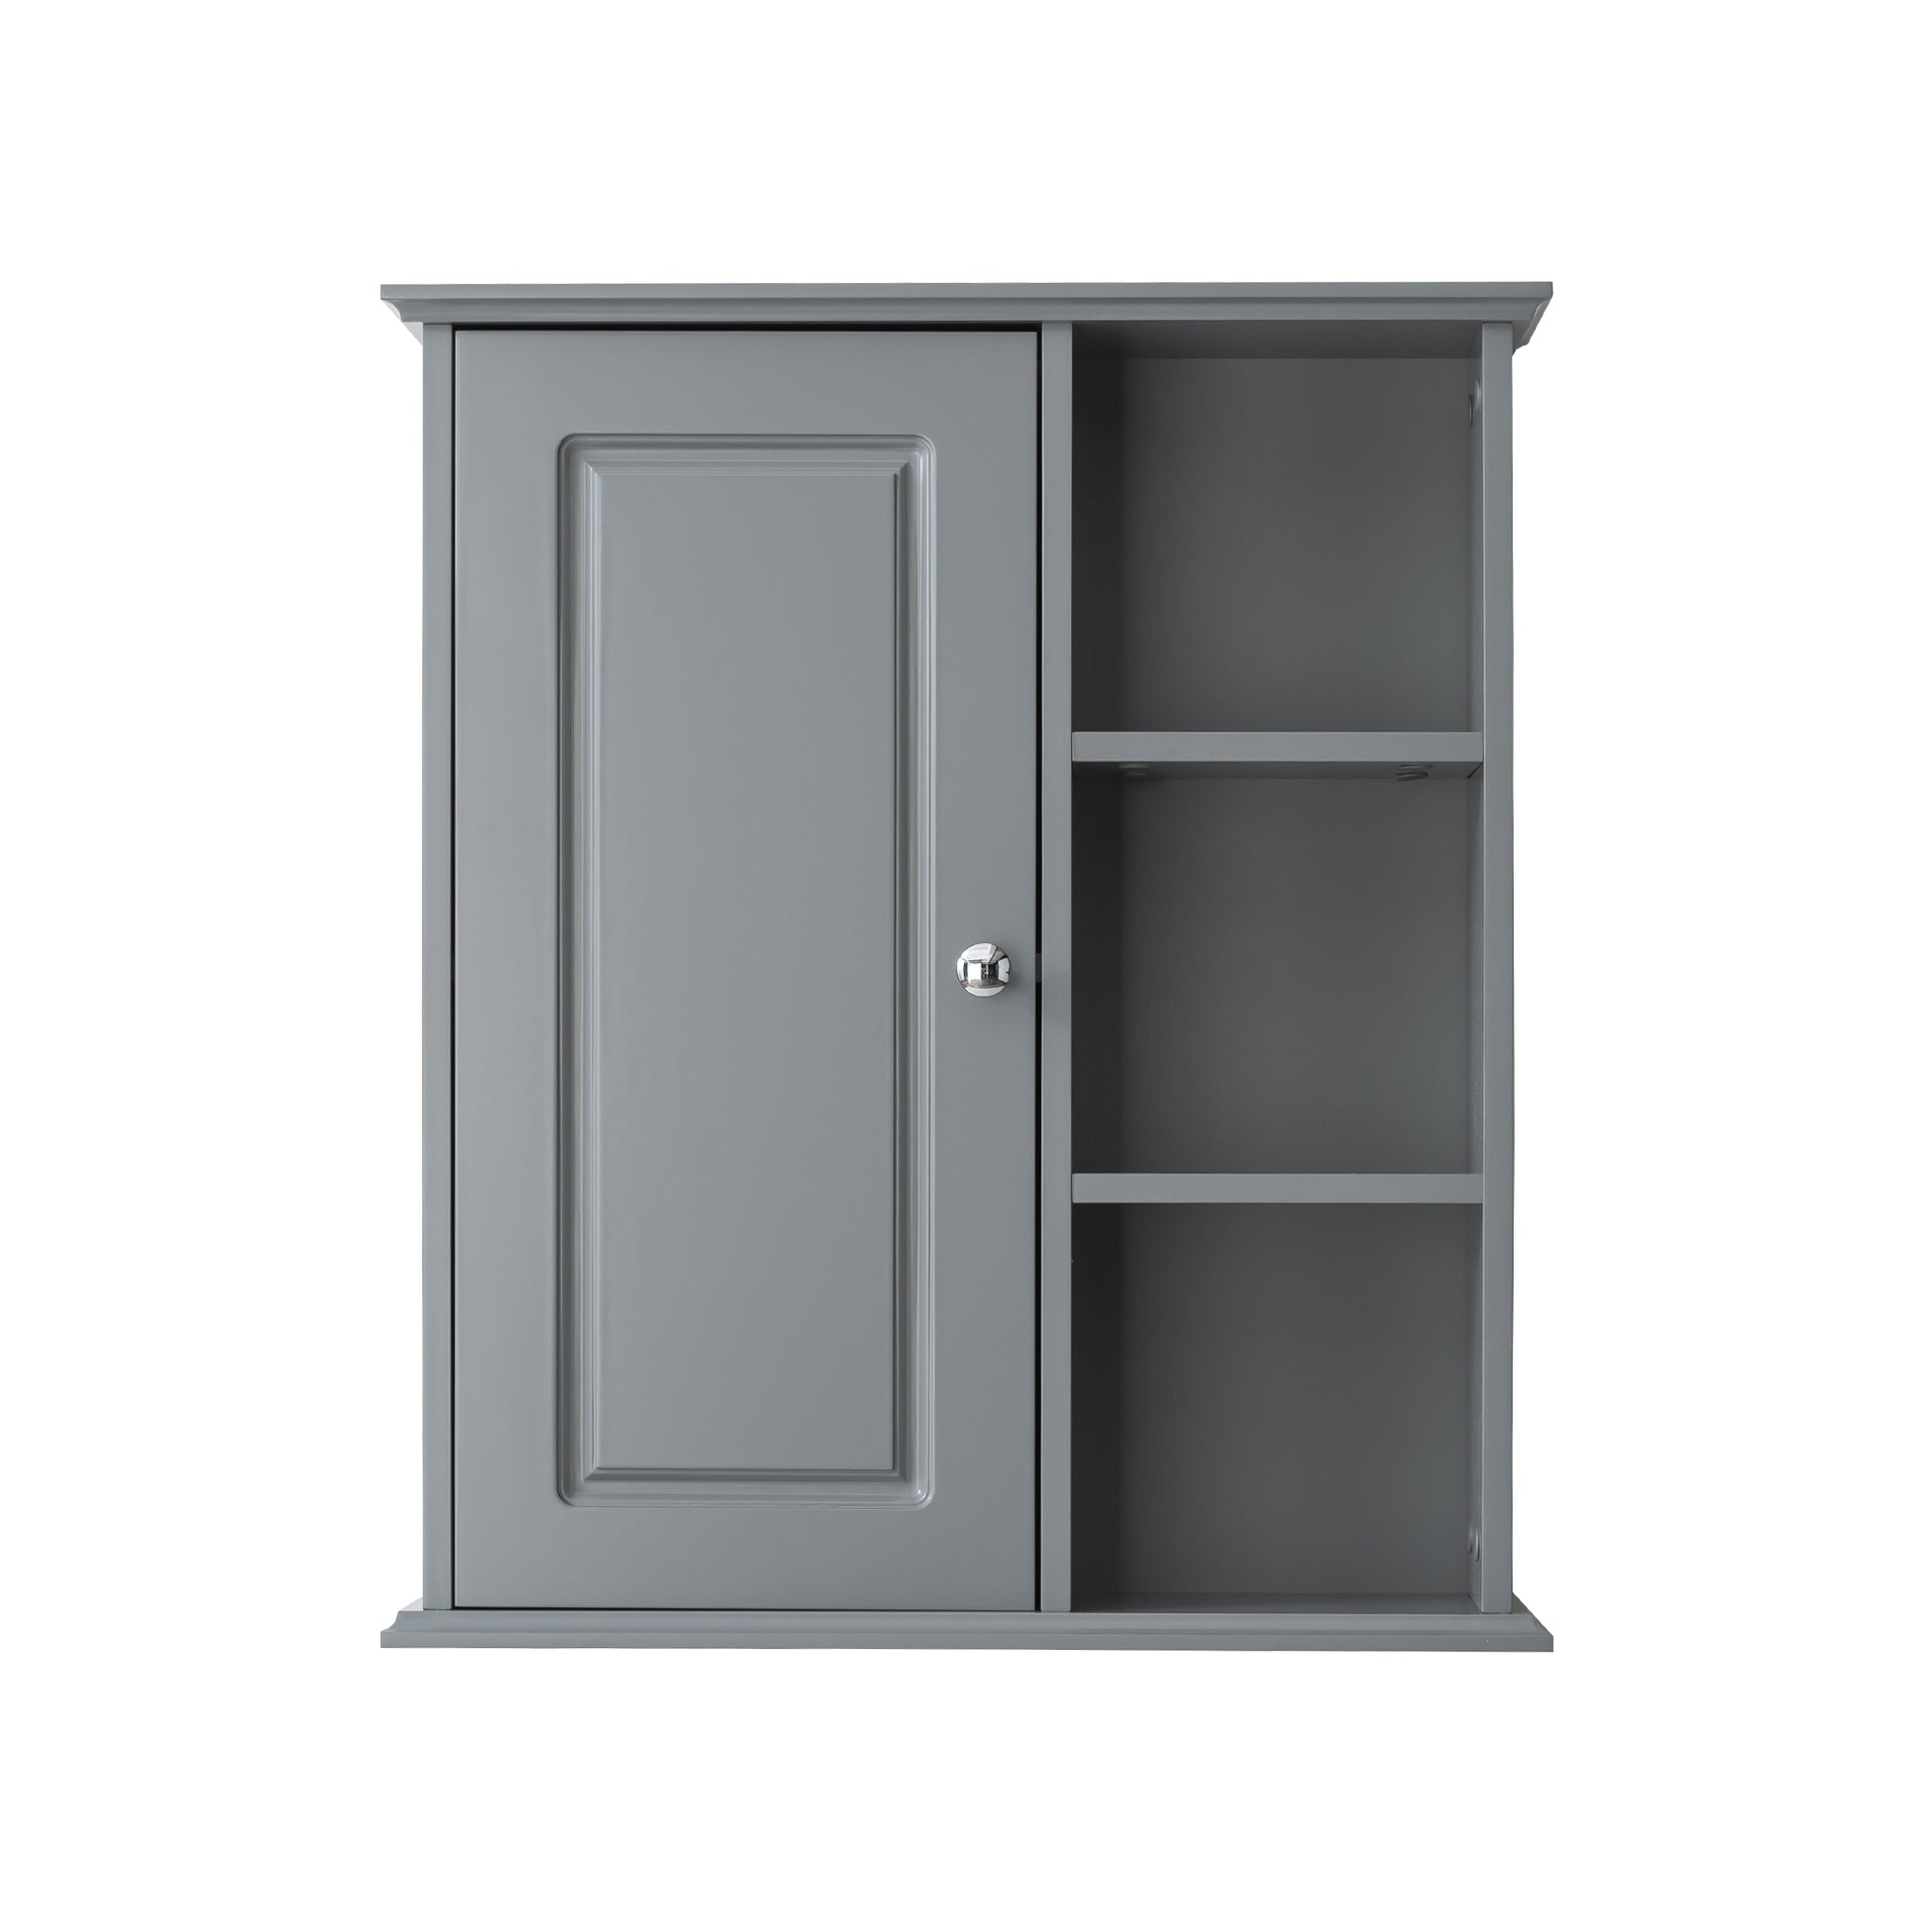 Bathroom Wall Cabinet in Black Ready to Assemble grey-1-3-soft close doors-wall